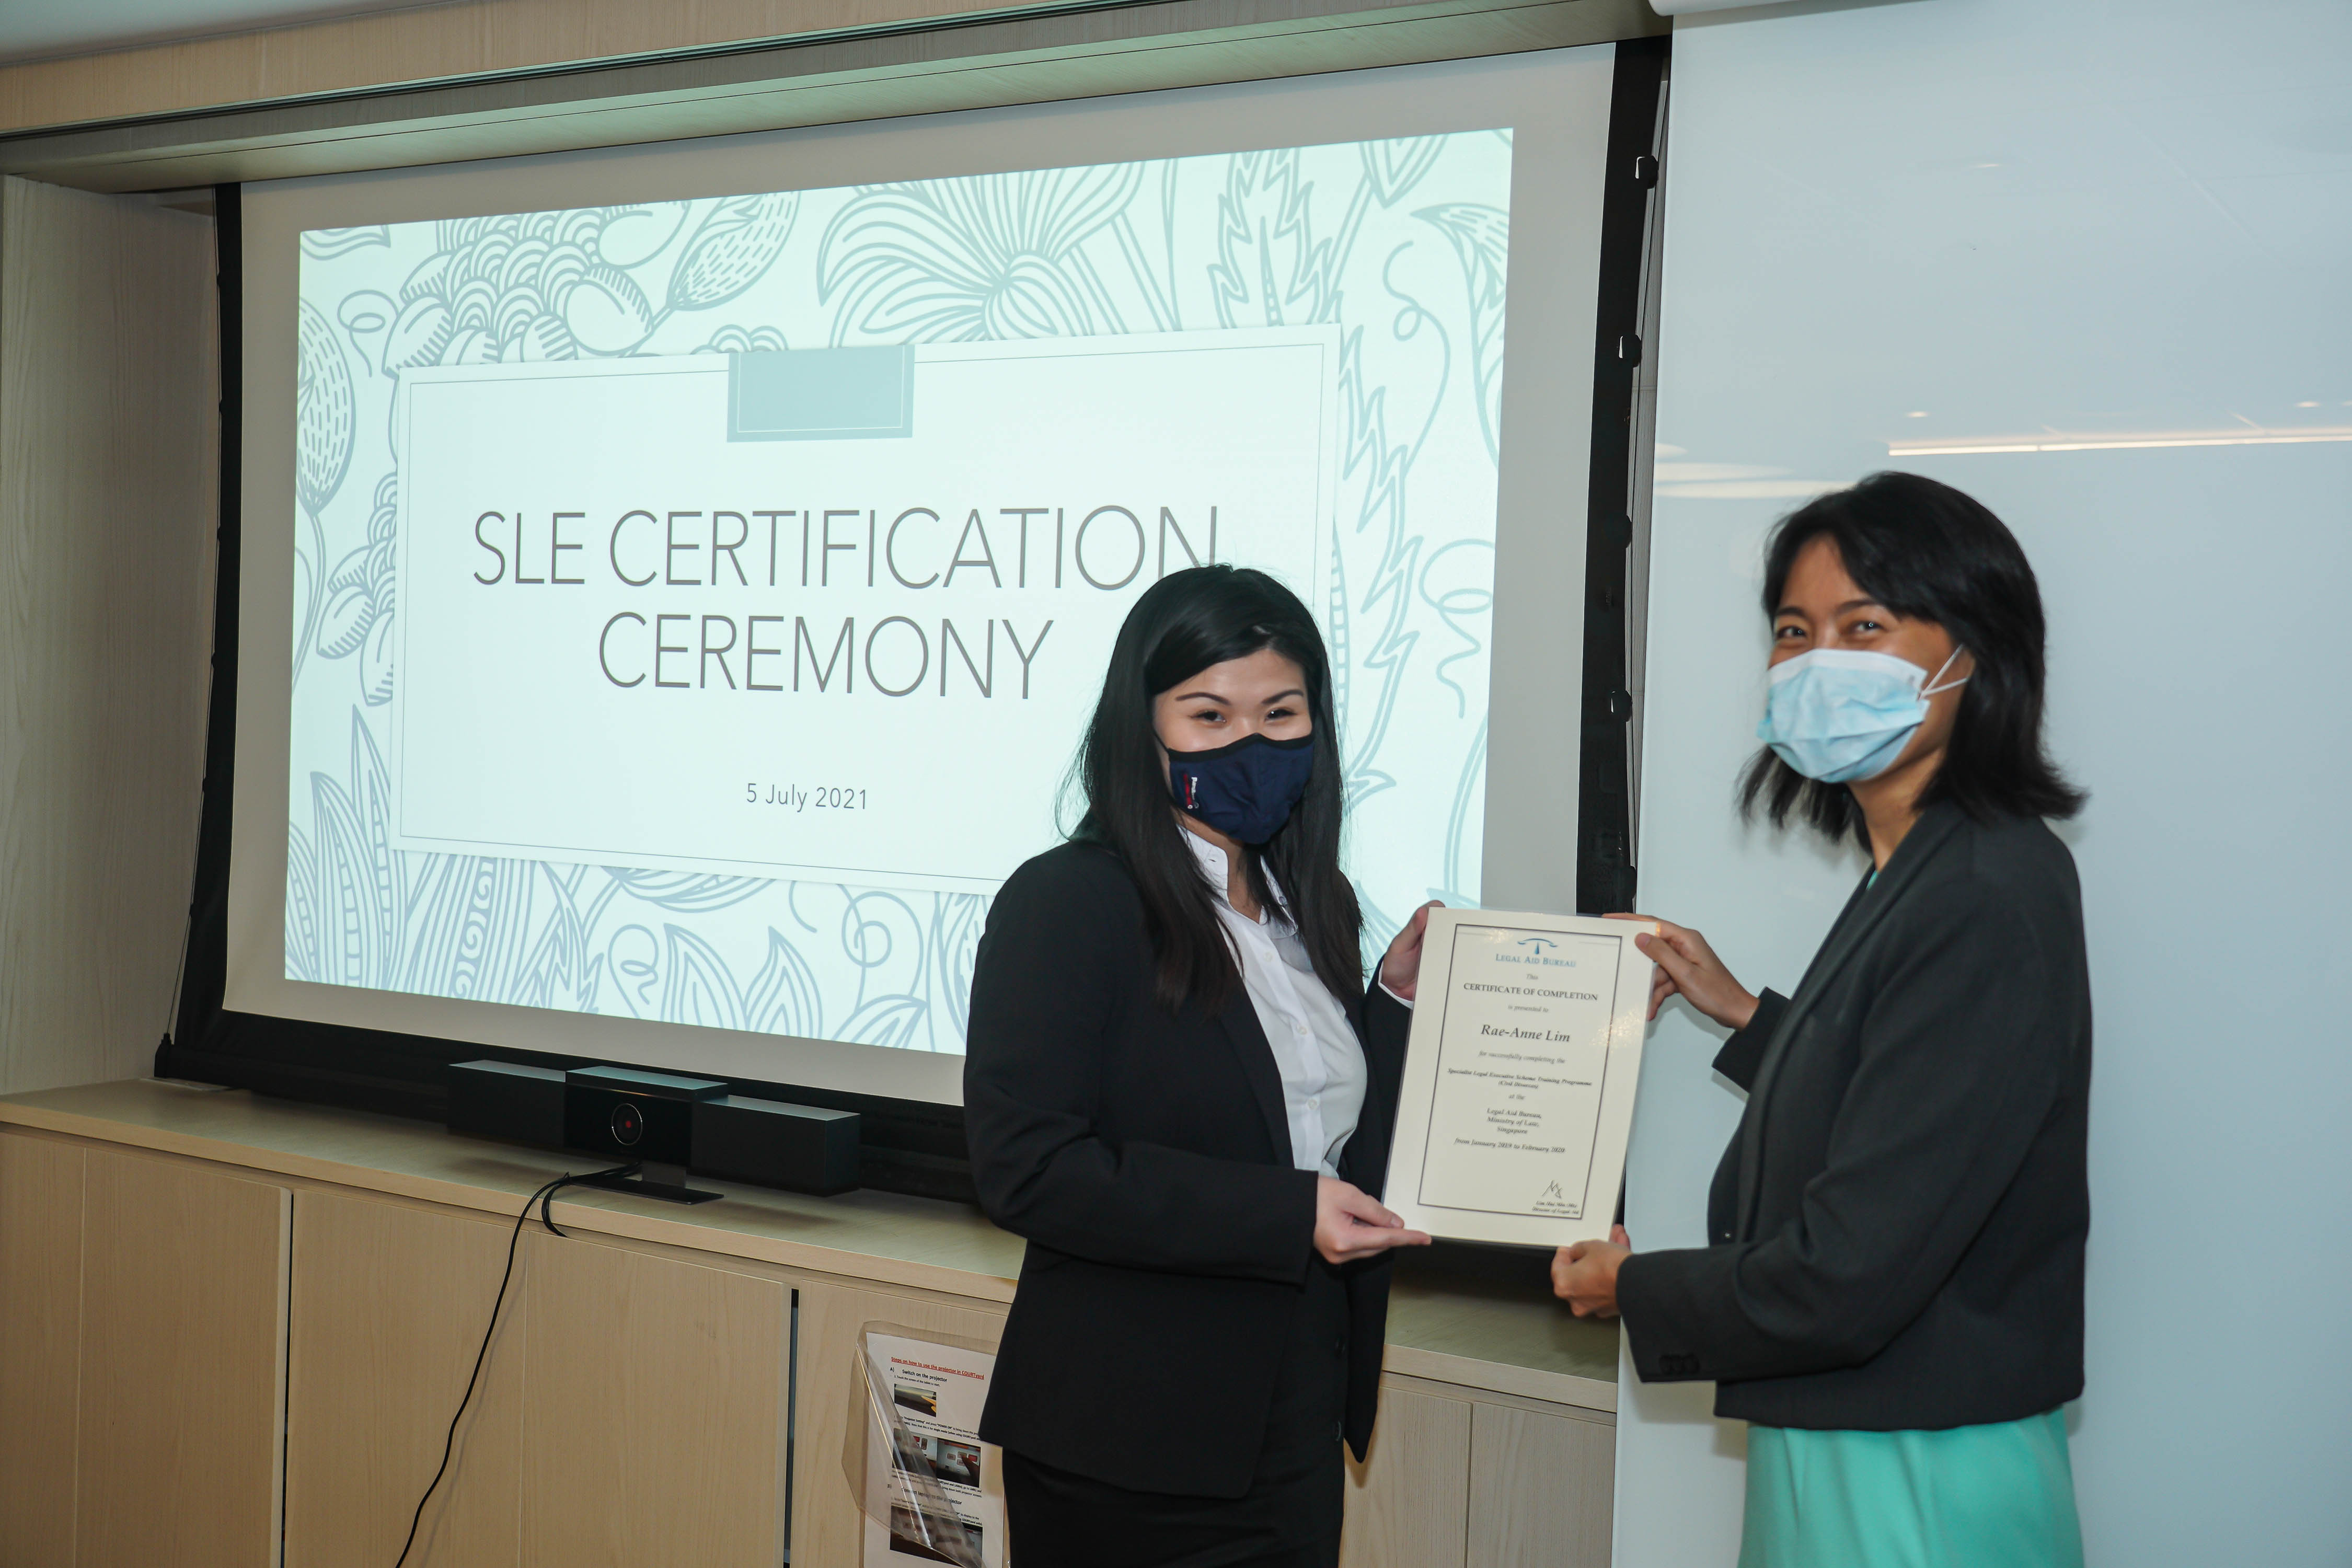 Rae-Anne (left) receiving her certificate from the Director of Legal Aid at MinLaw, Lim Hui Min, at the SLE Certification Ceremony in July 2021